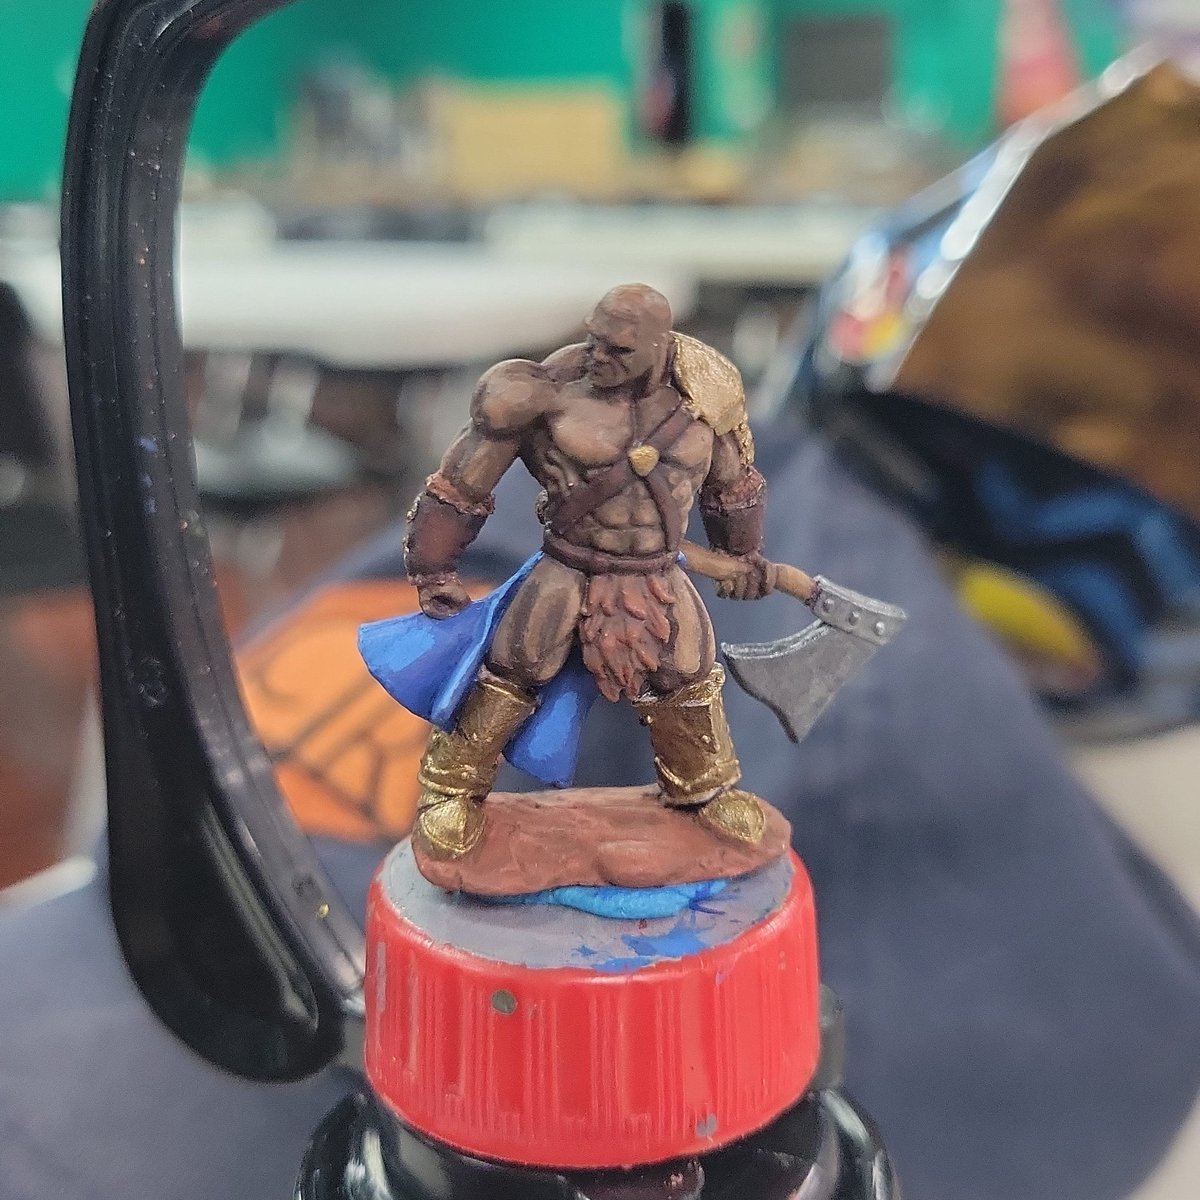 Diorama #wip

He thicc
#reaperminiatures #reaperpaints #reaperminis #reaperchallengeleague2021 #dndminis #miniatures #minis #minipainting #miniaturepainting #ttrpg #tabletoppainting #dnd #dnd5eminiatures #dndminiatures